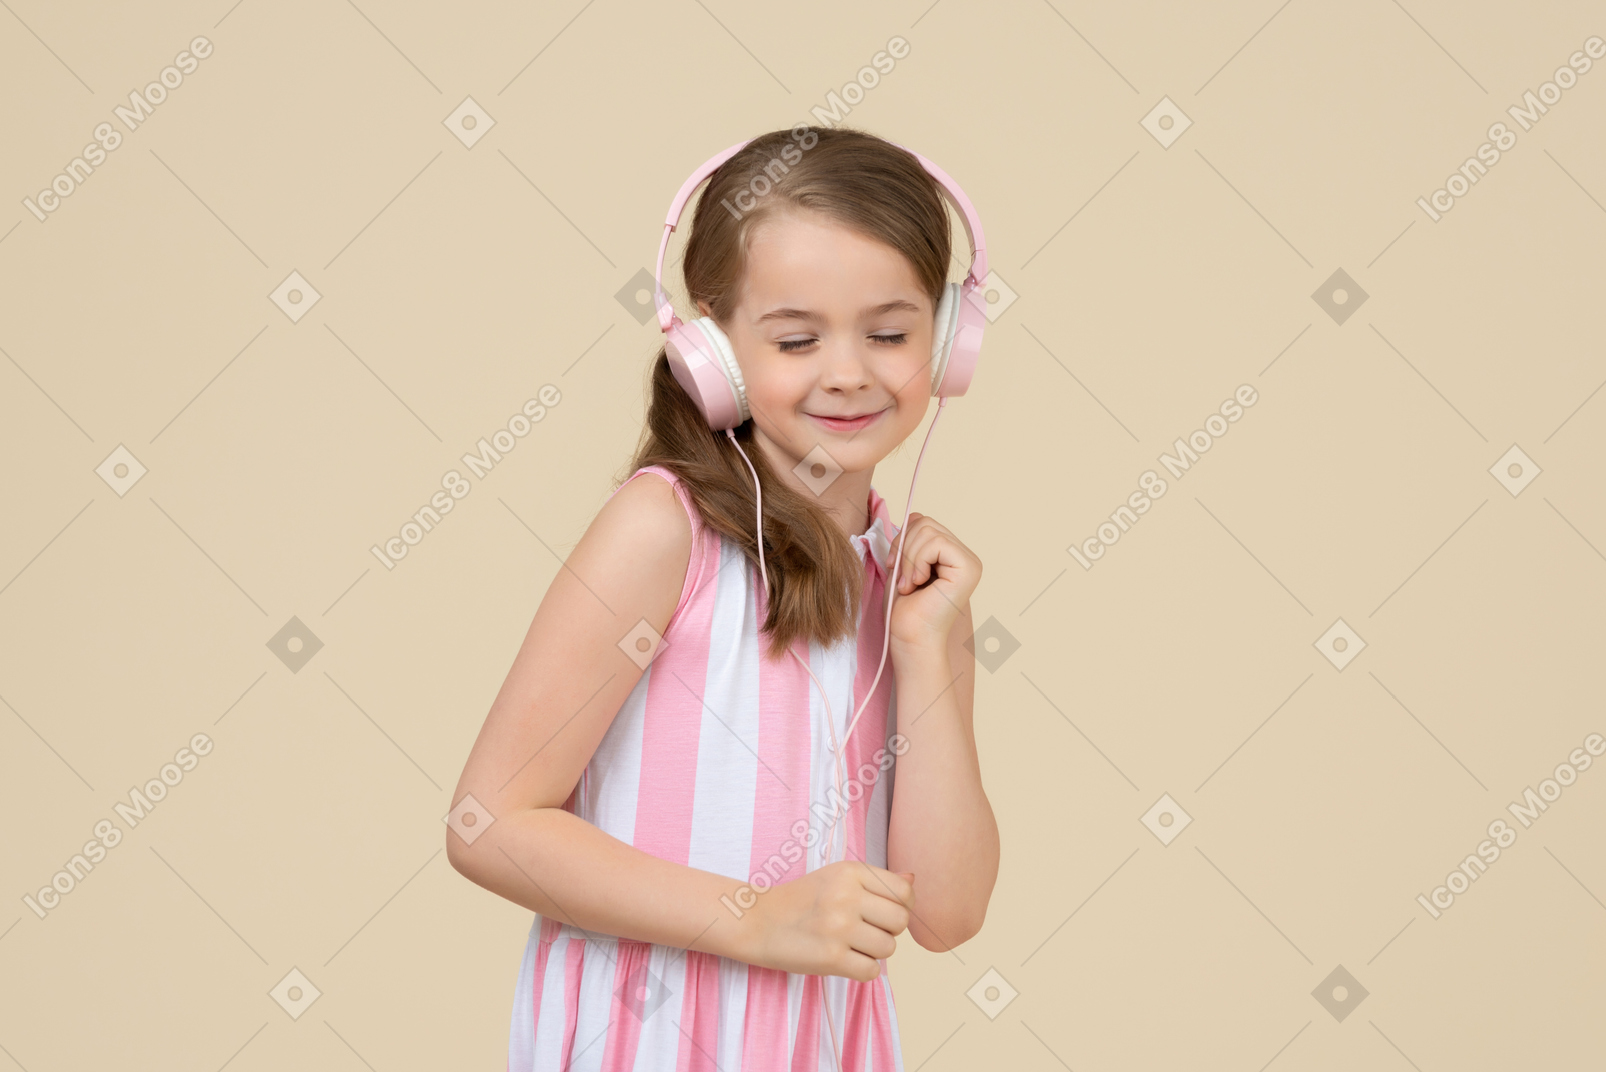 Good taste in music from a young age